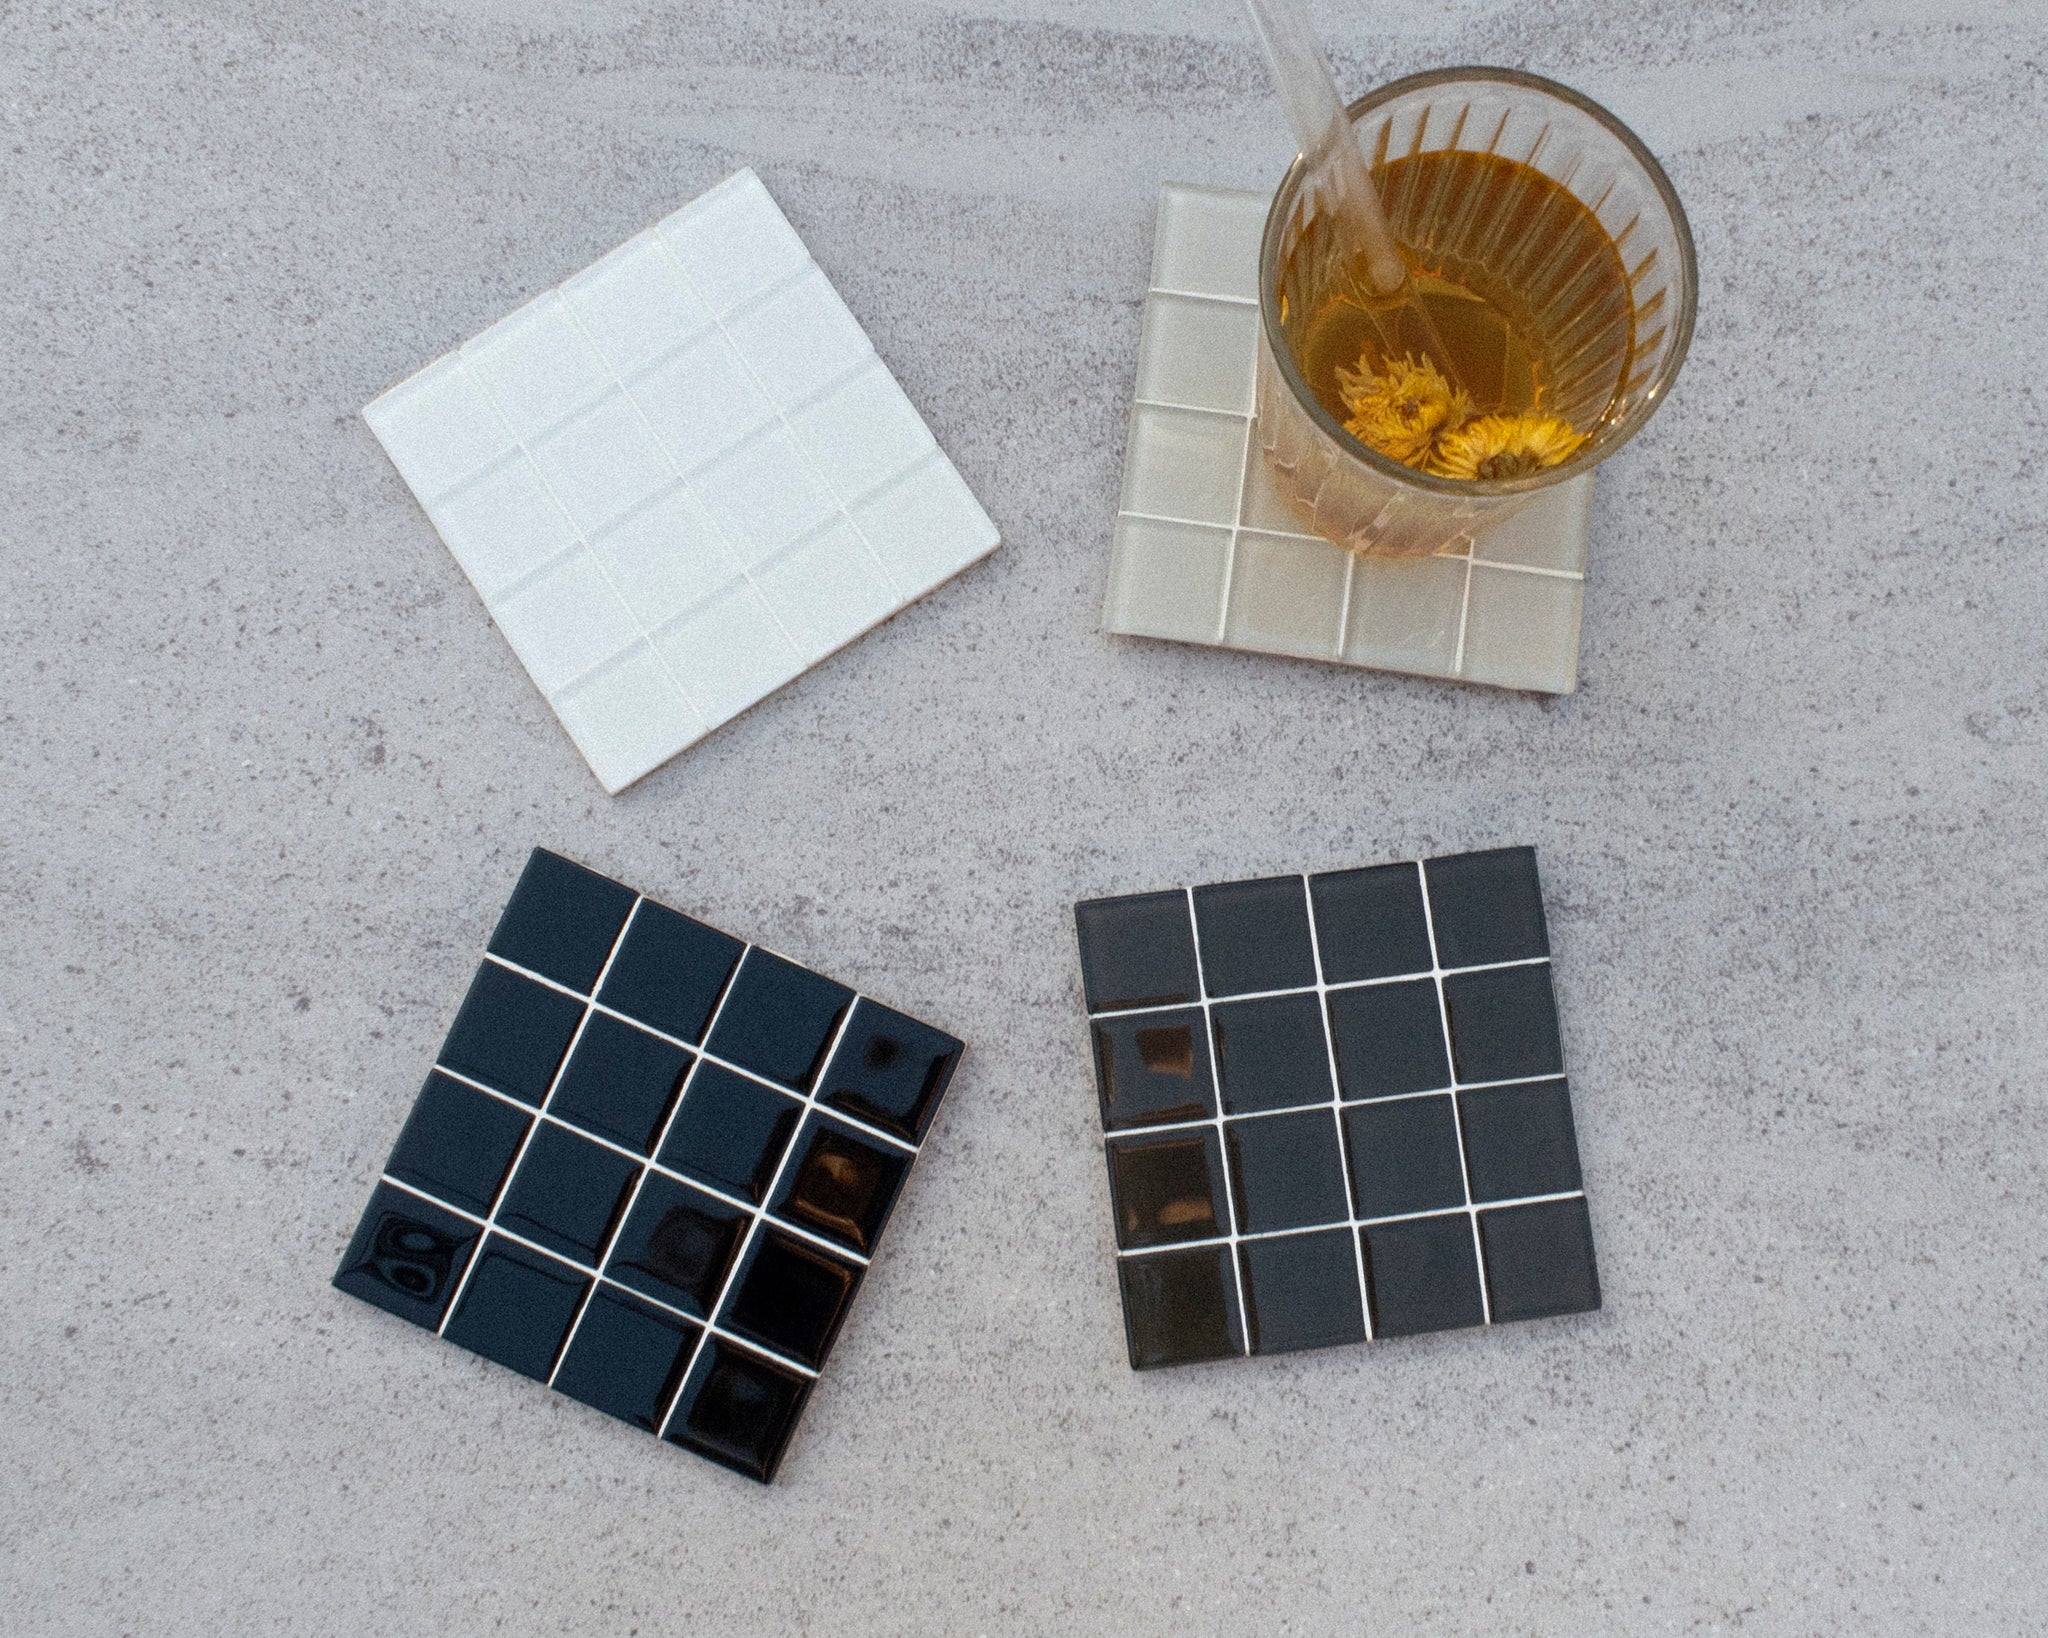 Glass Tile Coaster | Handmade Drink Coaster | Square Coaster | Housewarming Gift | Gift for Her | Gift for Him | Valentine Gifts